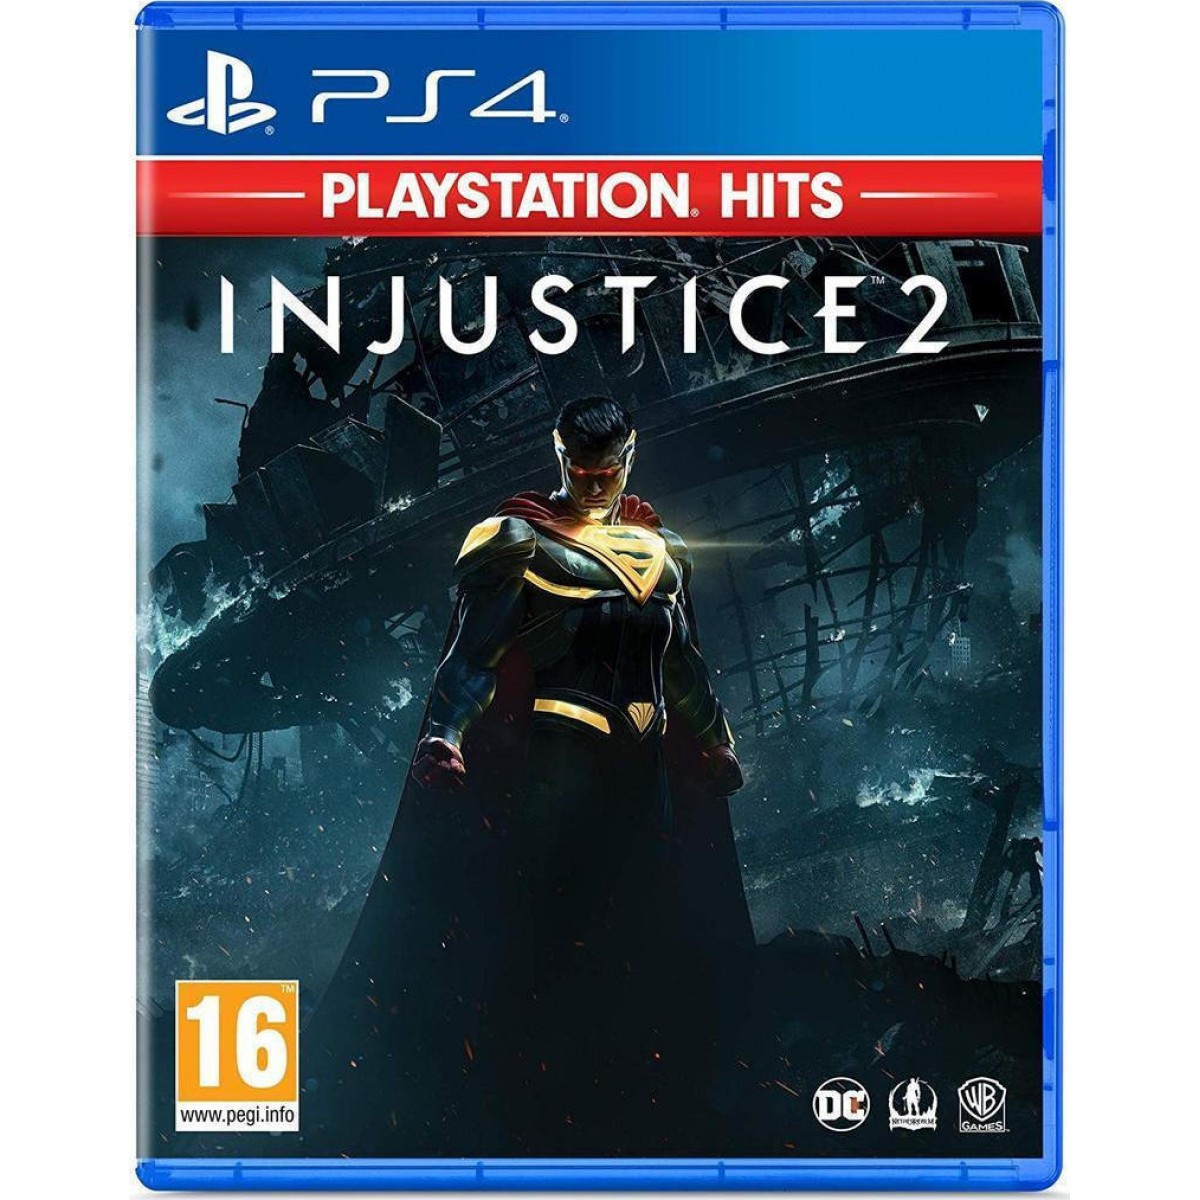 PS4 INJUSTICE 2 GAME (HITS)